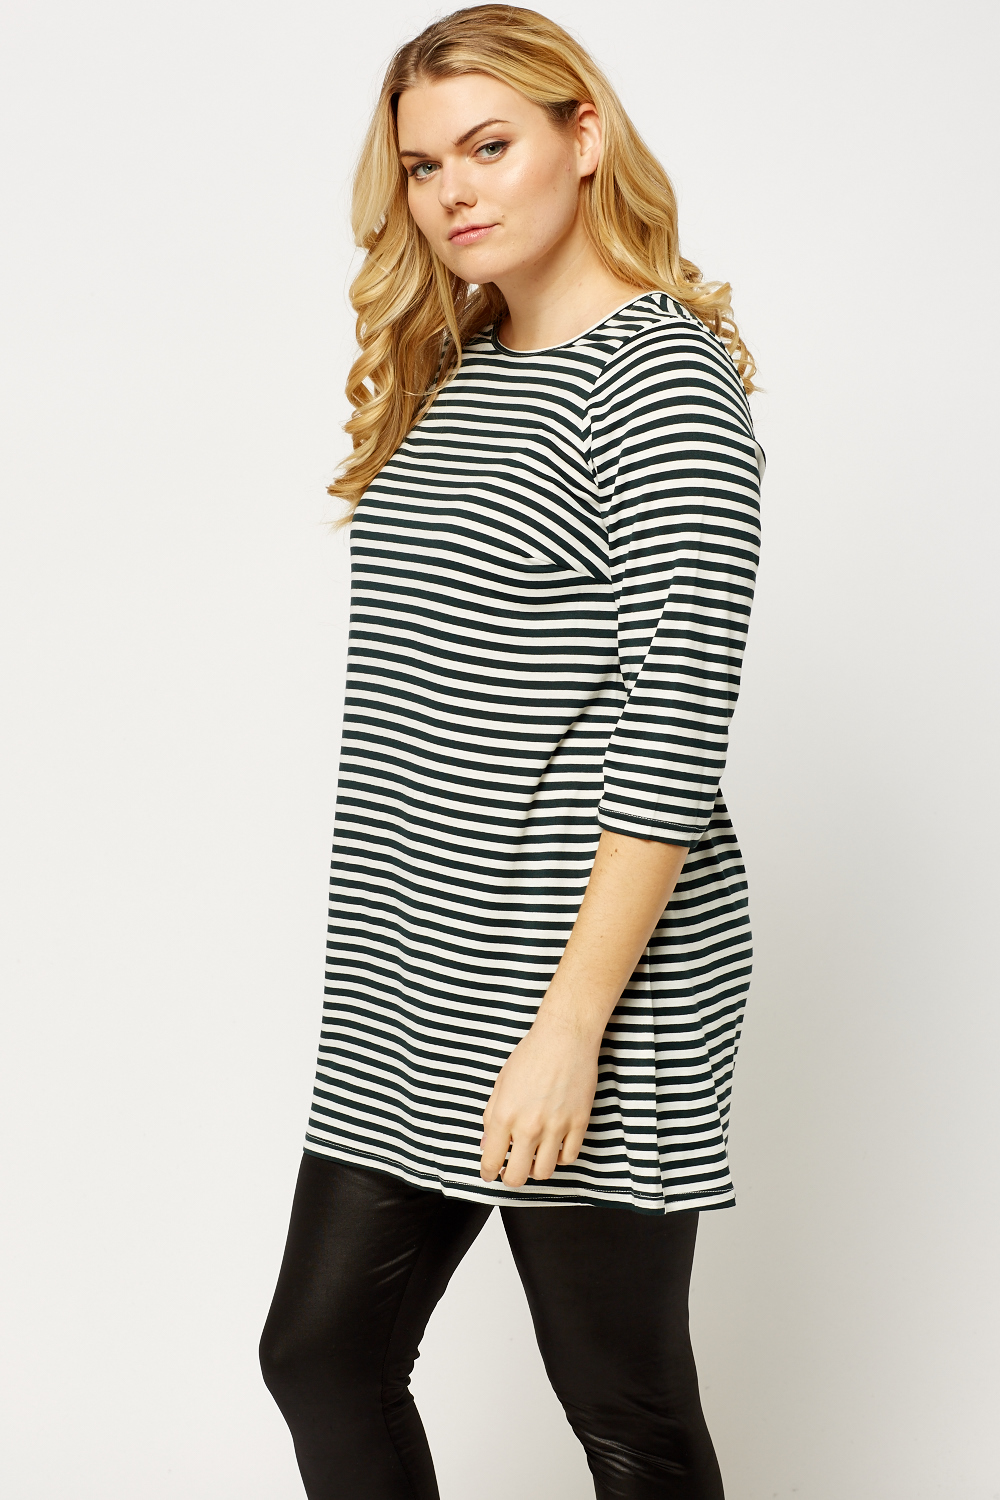 Striped Tunic Top - Just $7